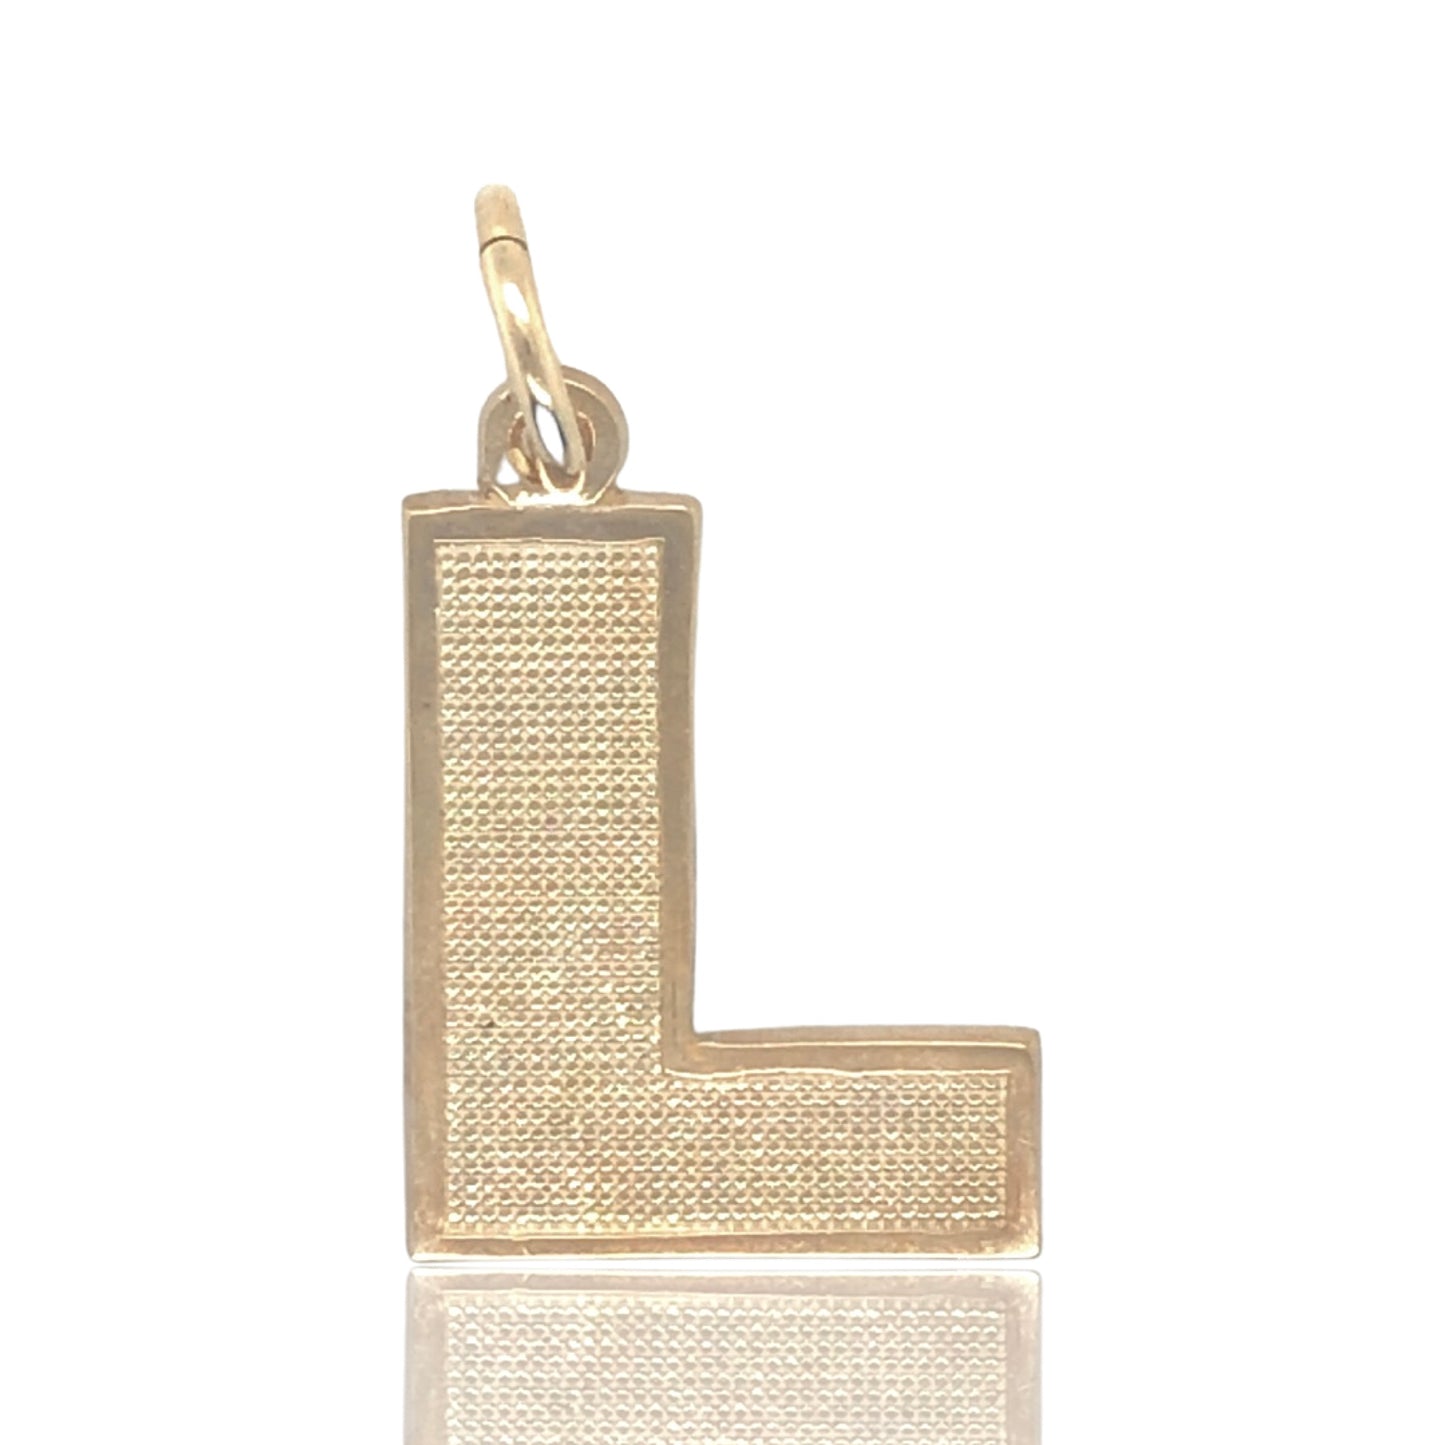 10K yellow gold bold style Initial letter "L"